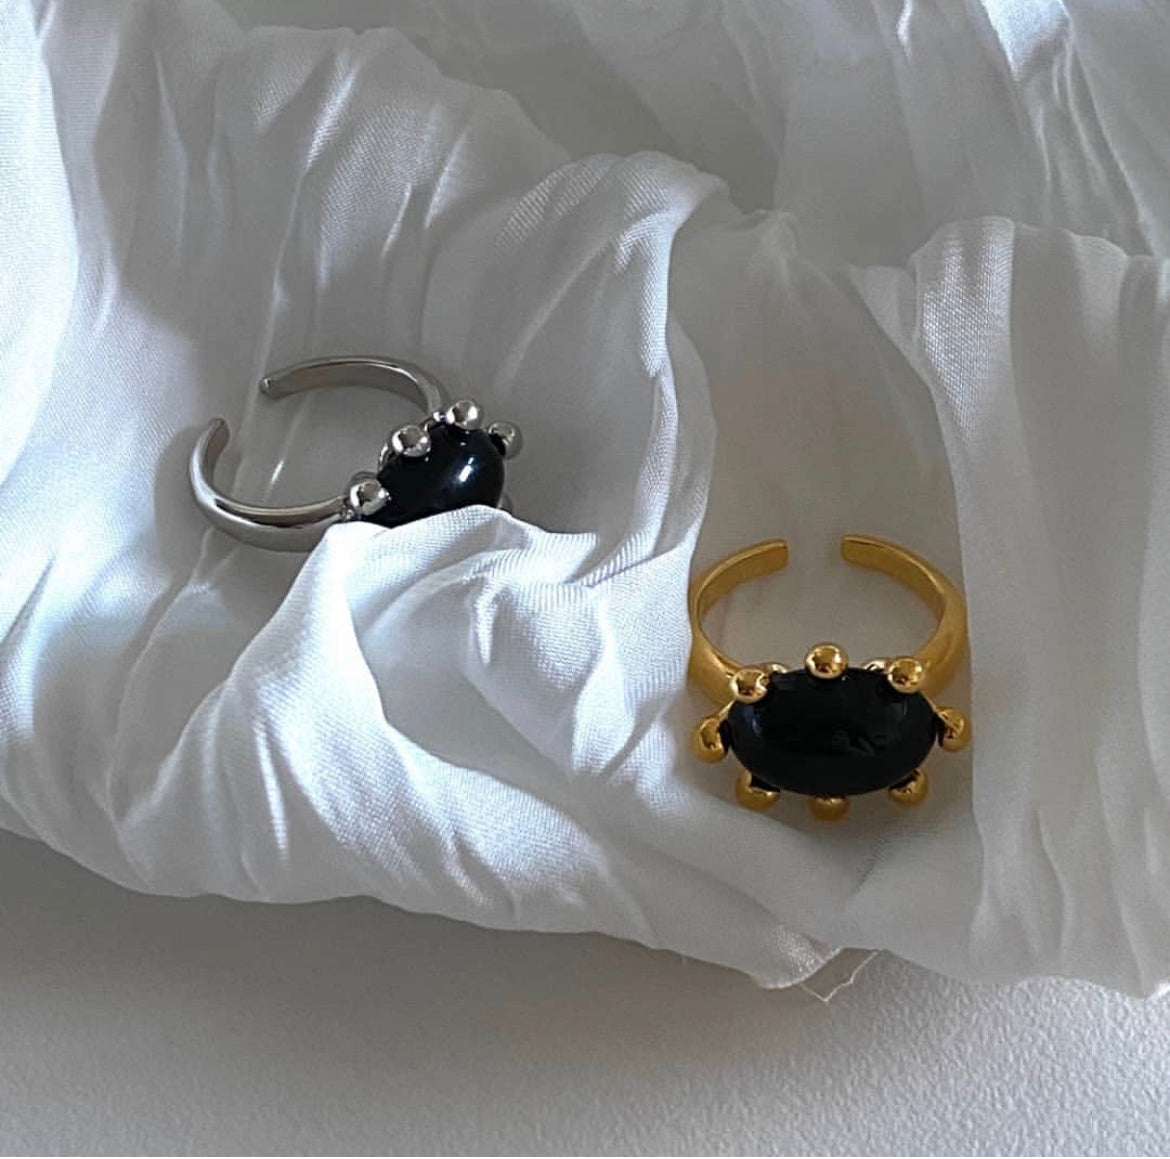 Onyx D Ring in Gold